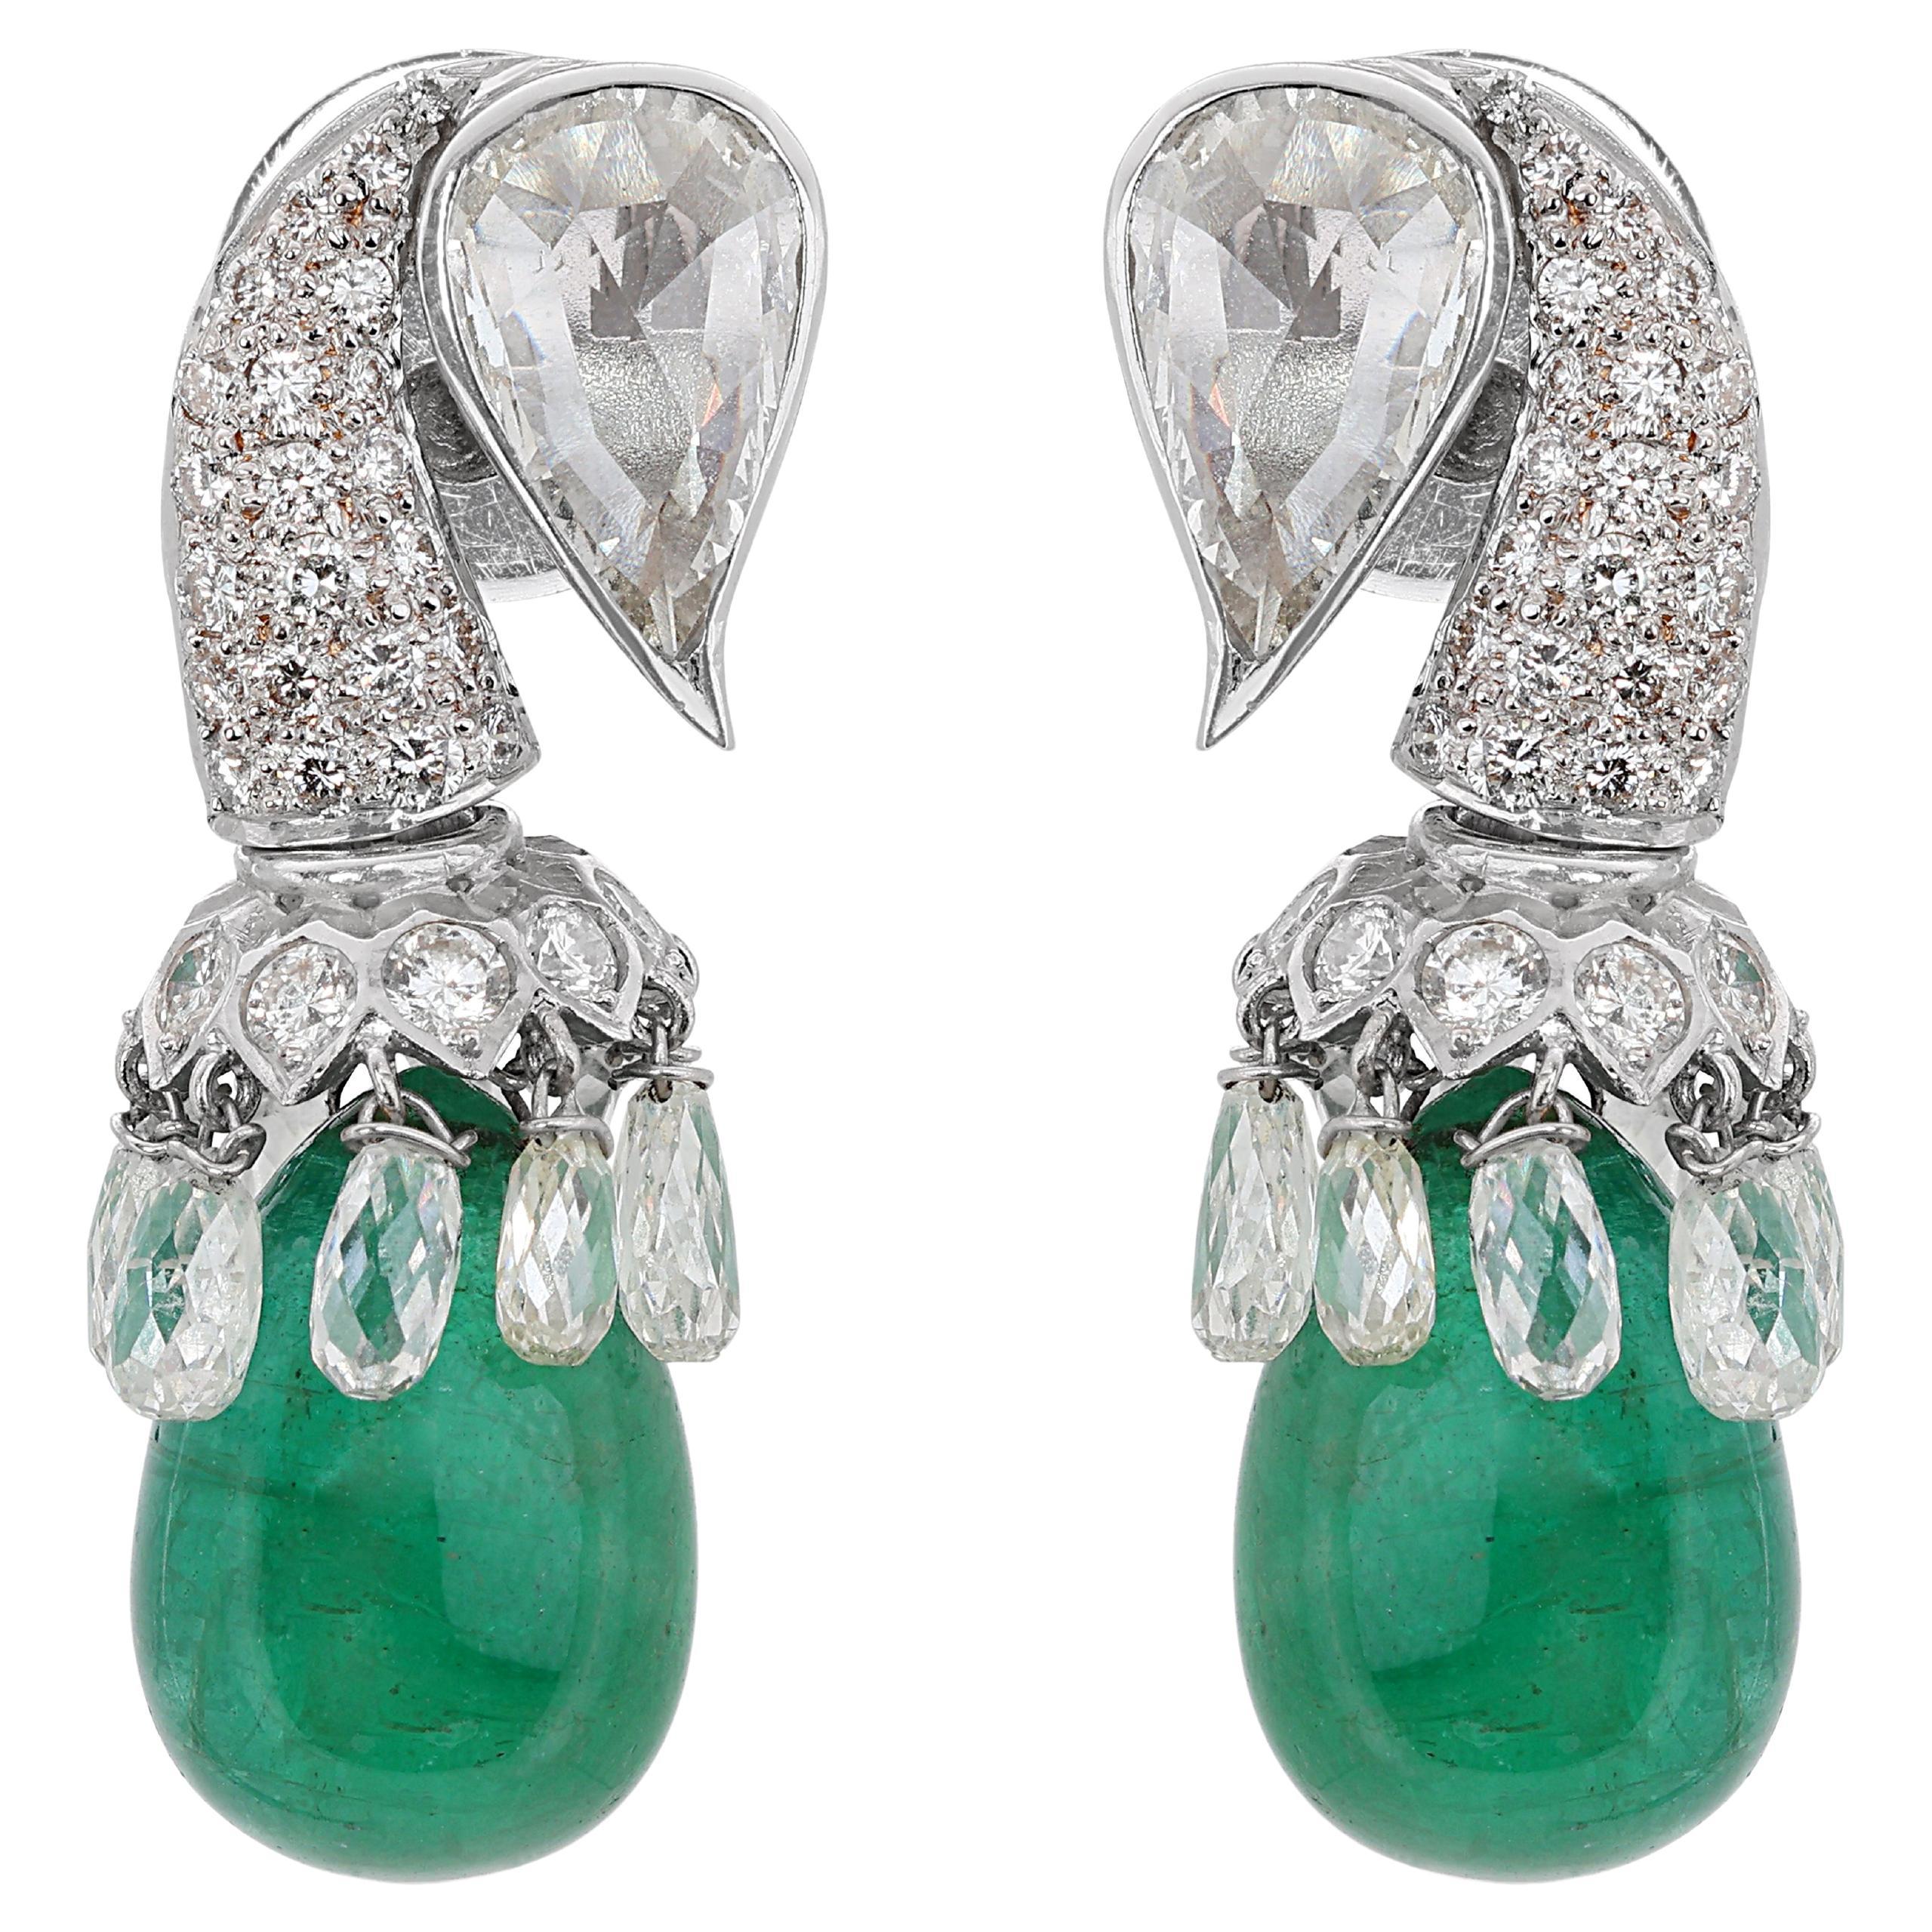 Gorgeous 24.31ct Green Emerald Teardrop Earrings with Diamonds in 18K White Gold For Sale